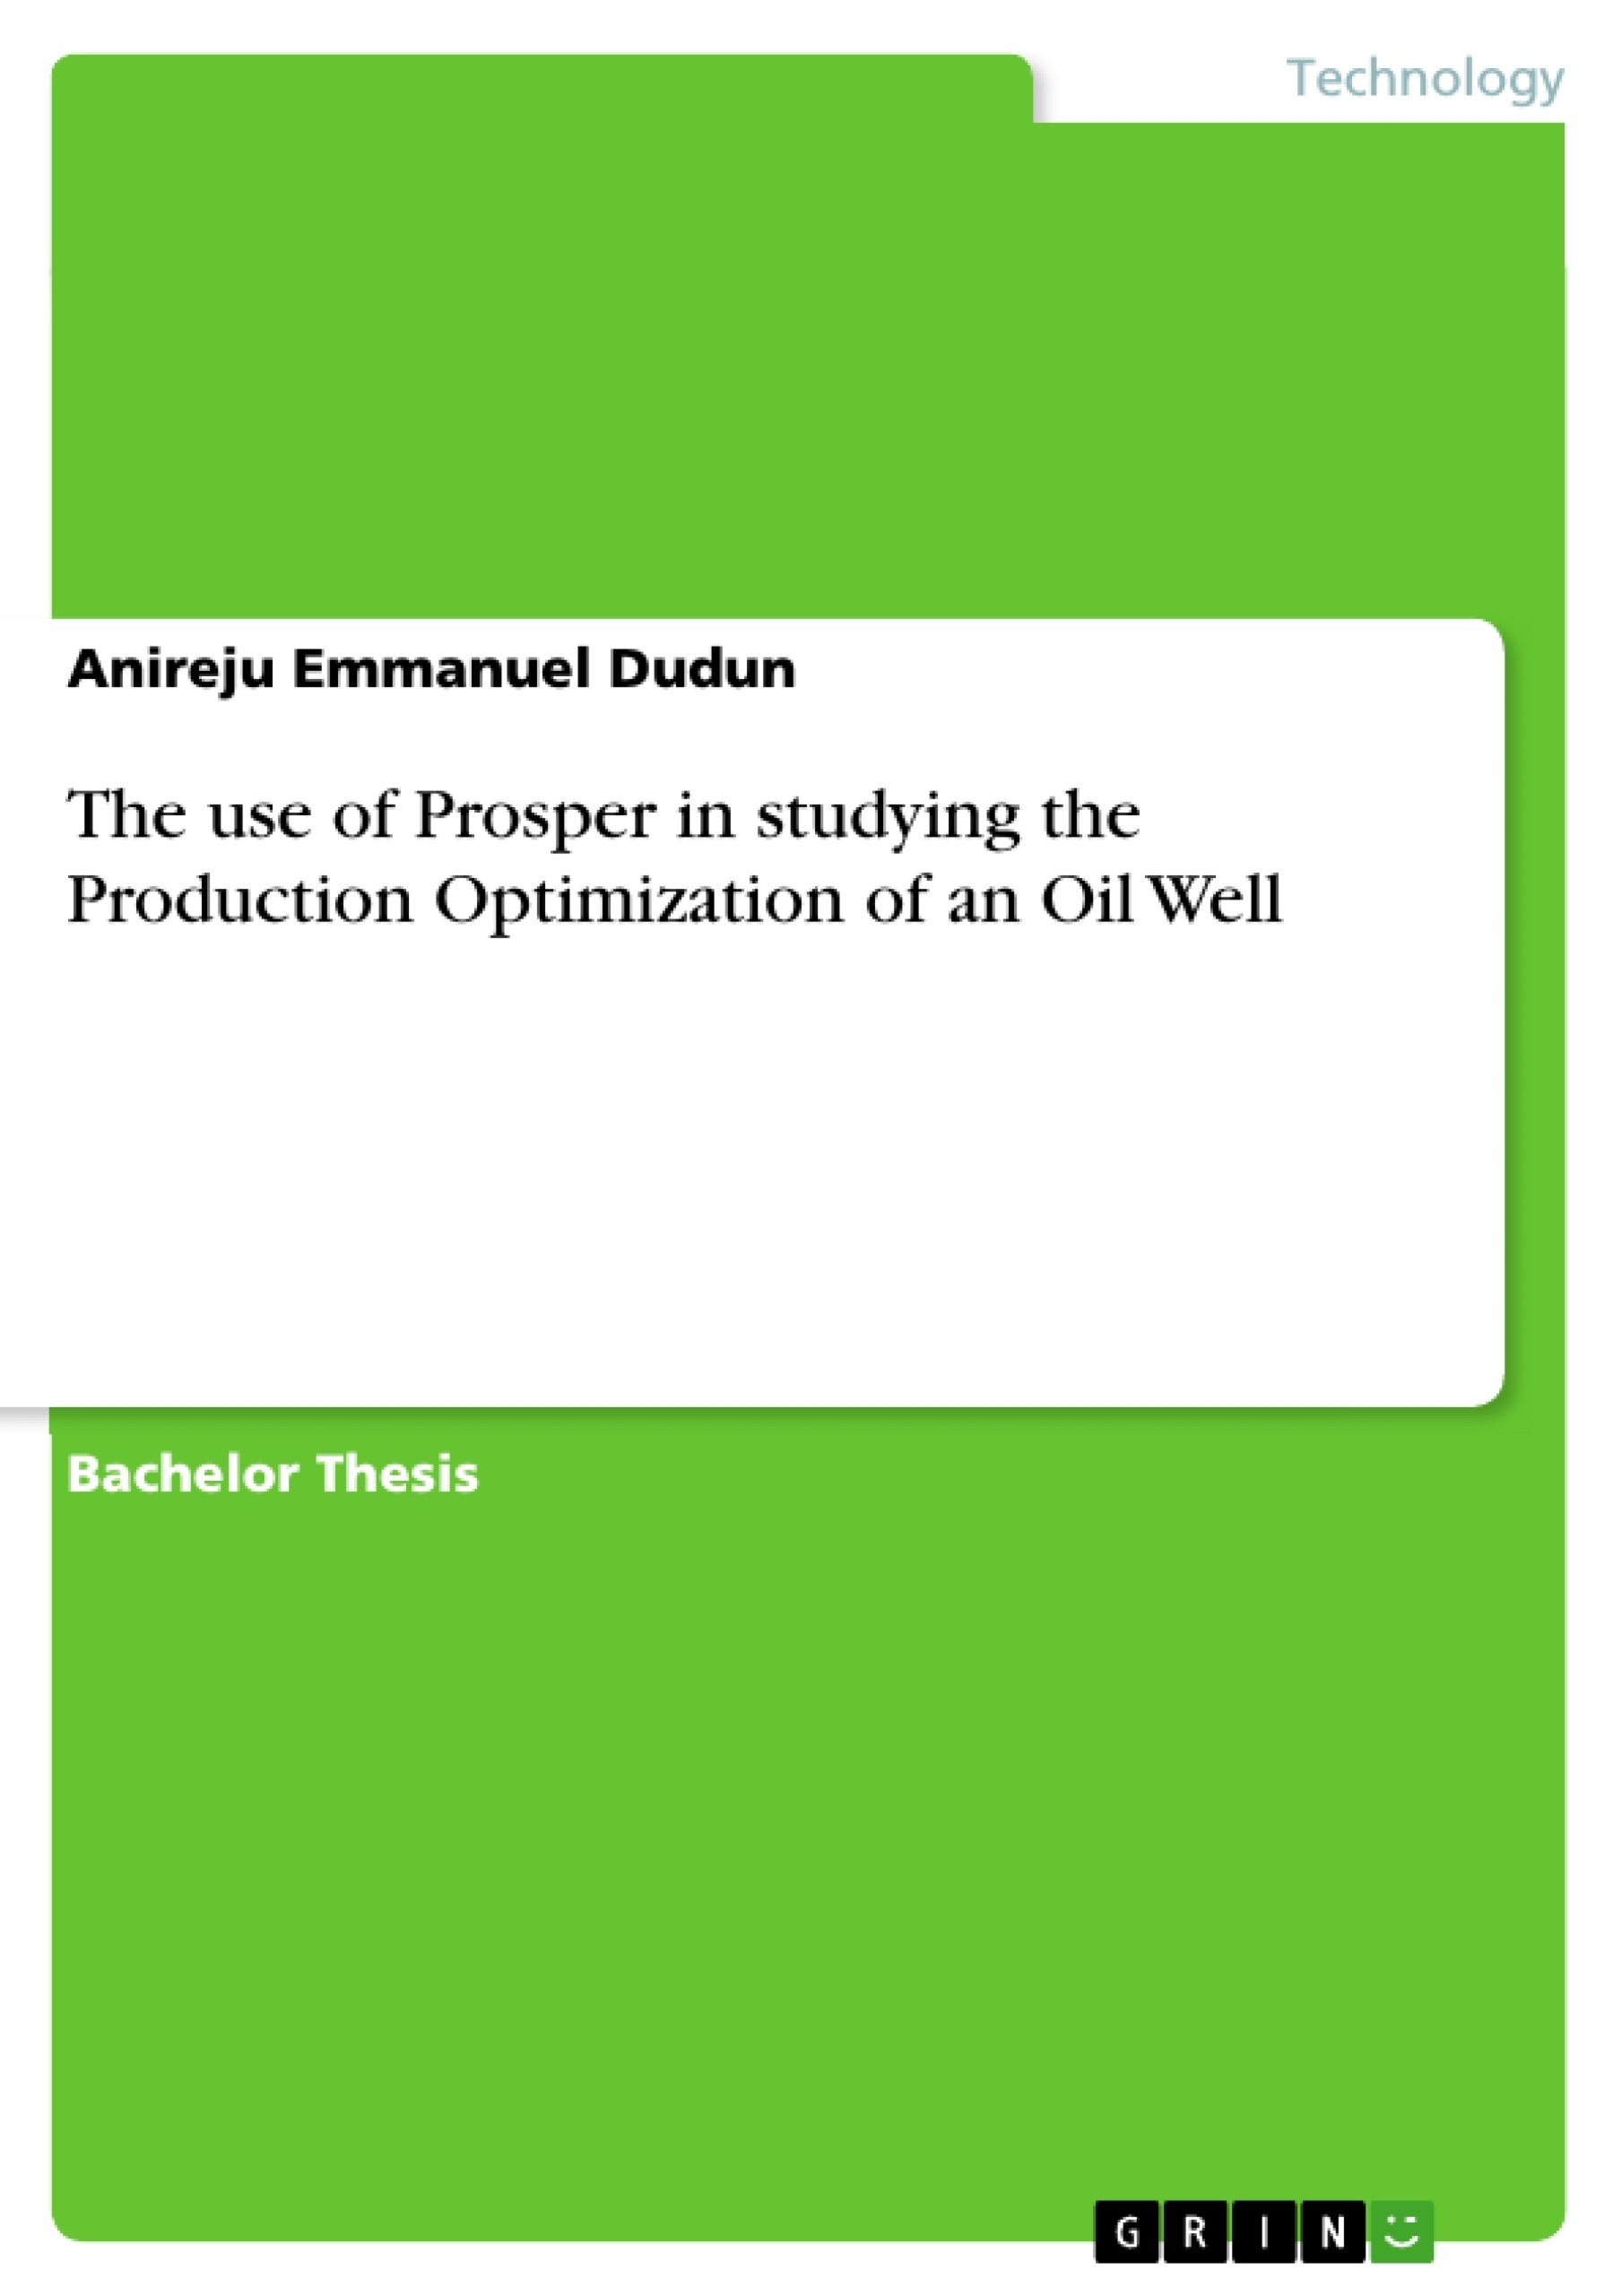 Titre: The use of Prosper in studying the Production Optimization of an Oil Well